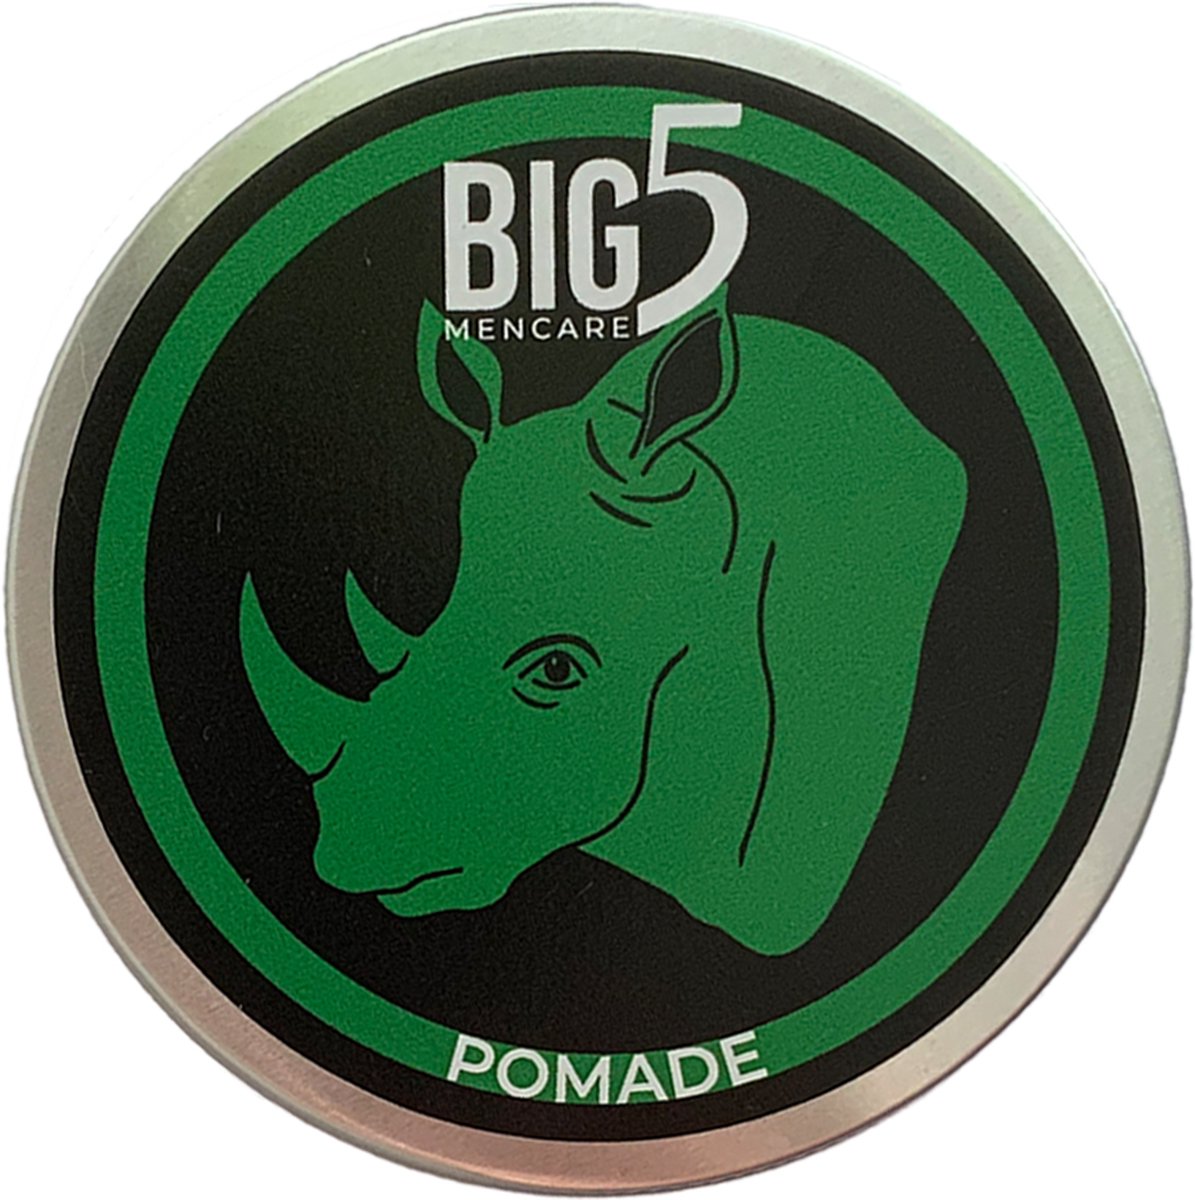 Pomade | 100ml |Haarstyling | Big 5 Mencare